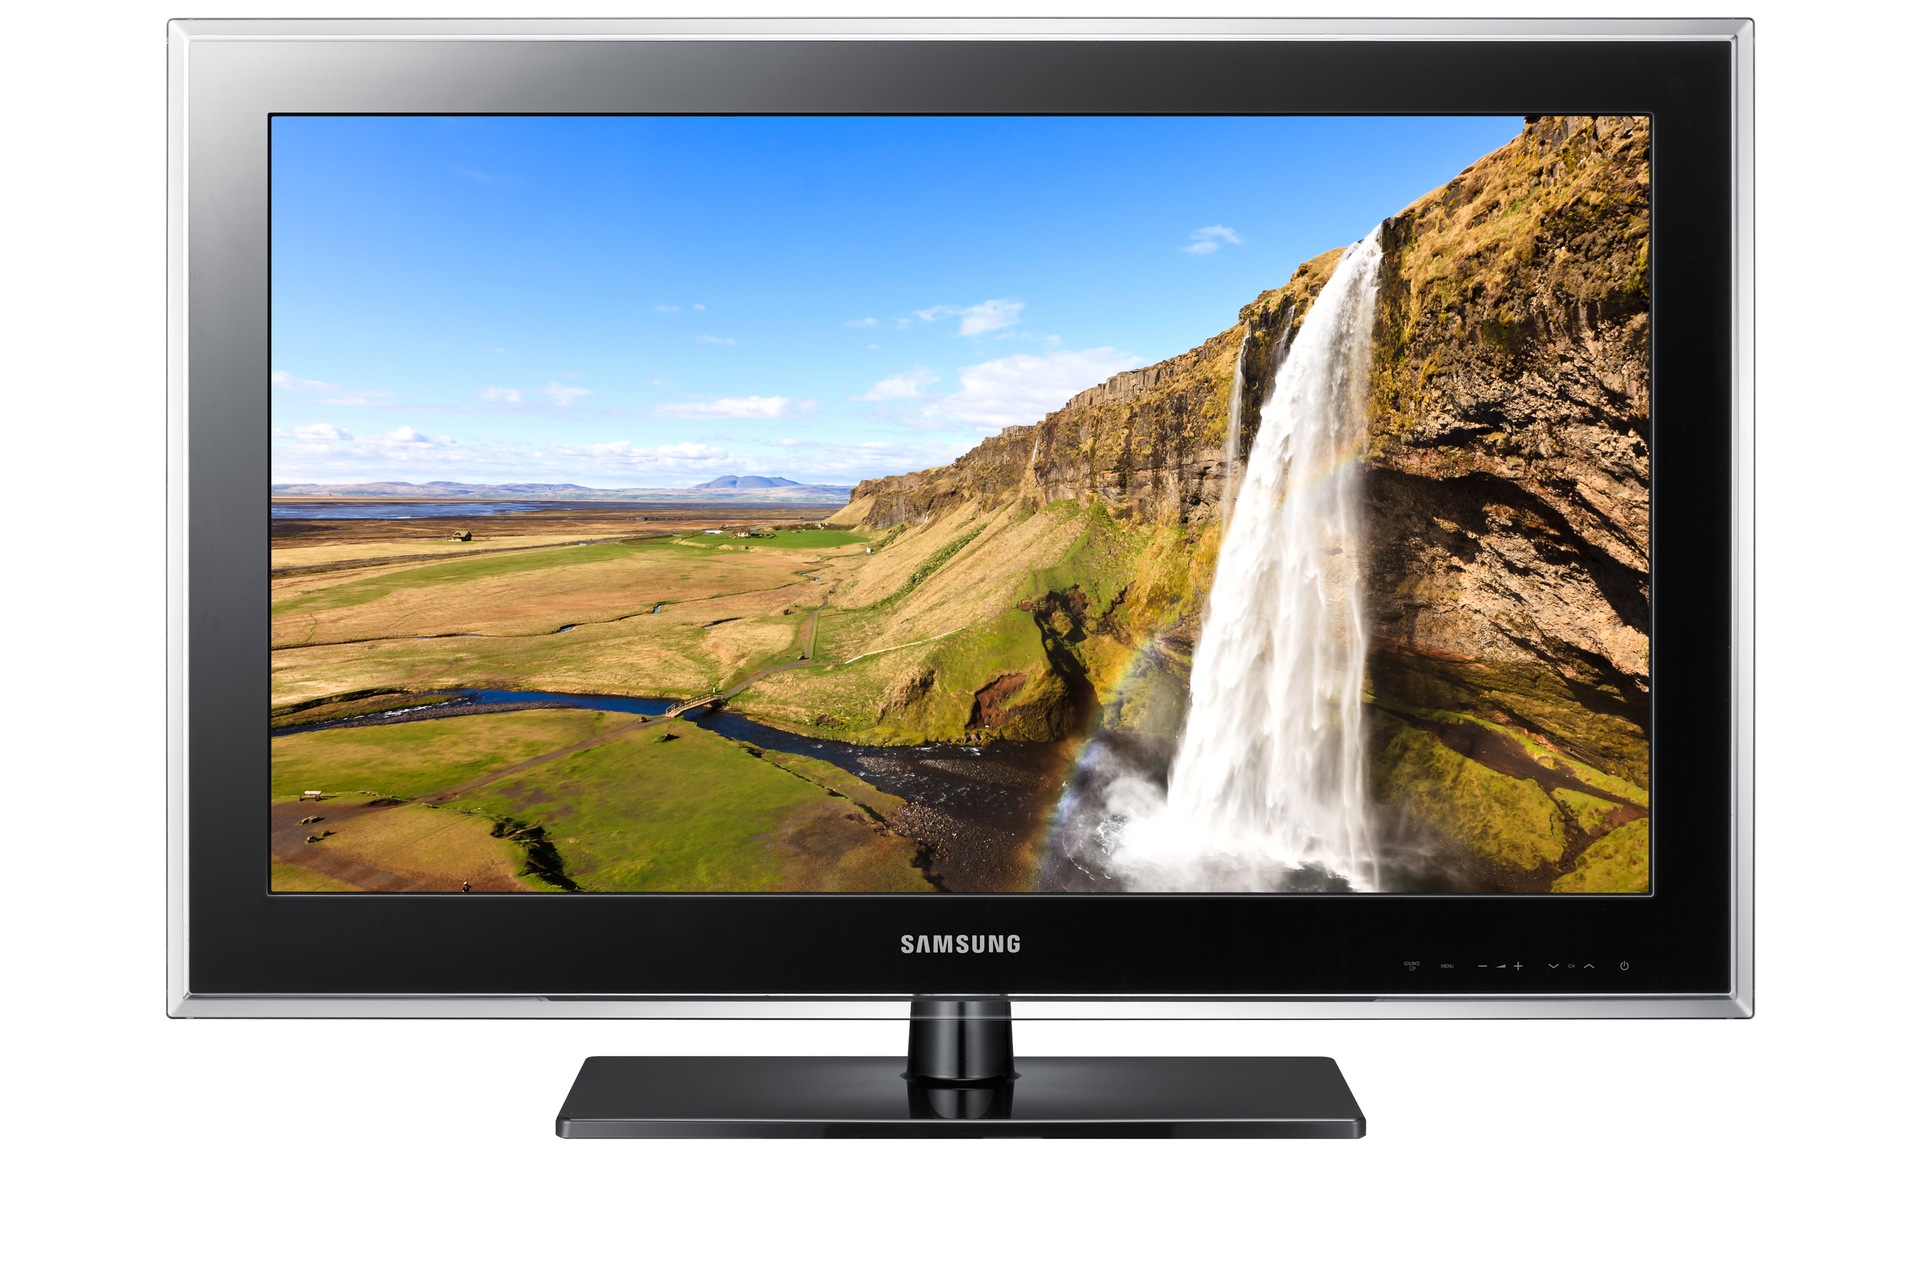 stopcontact Extreme armoede Productief LE32D550 LCD-TV 32" | Samsung Service BE